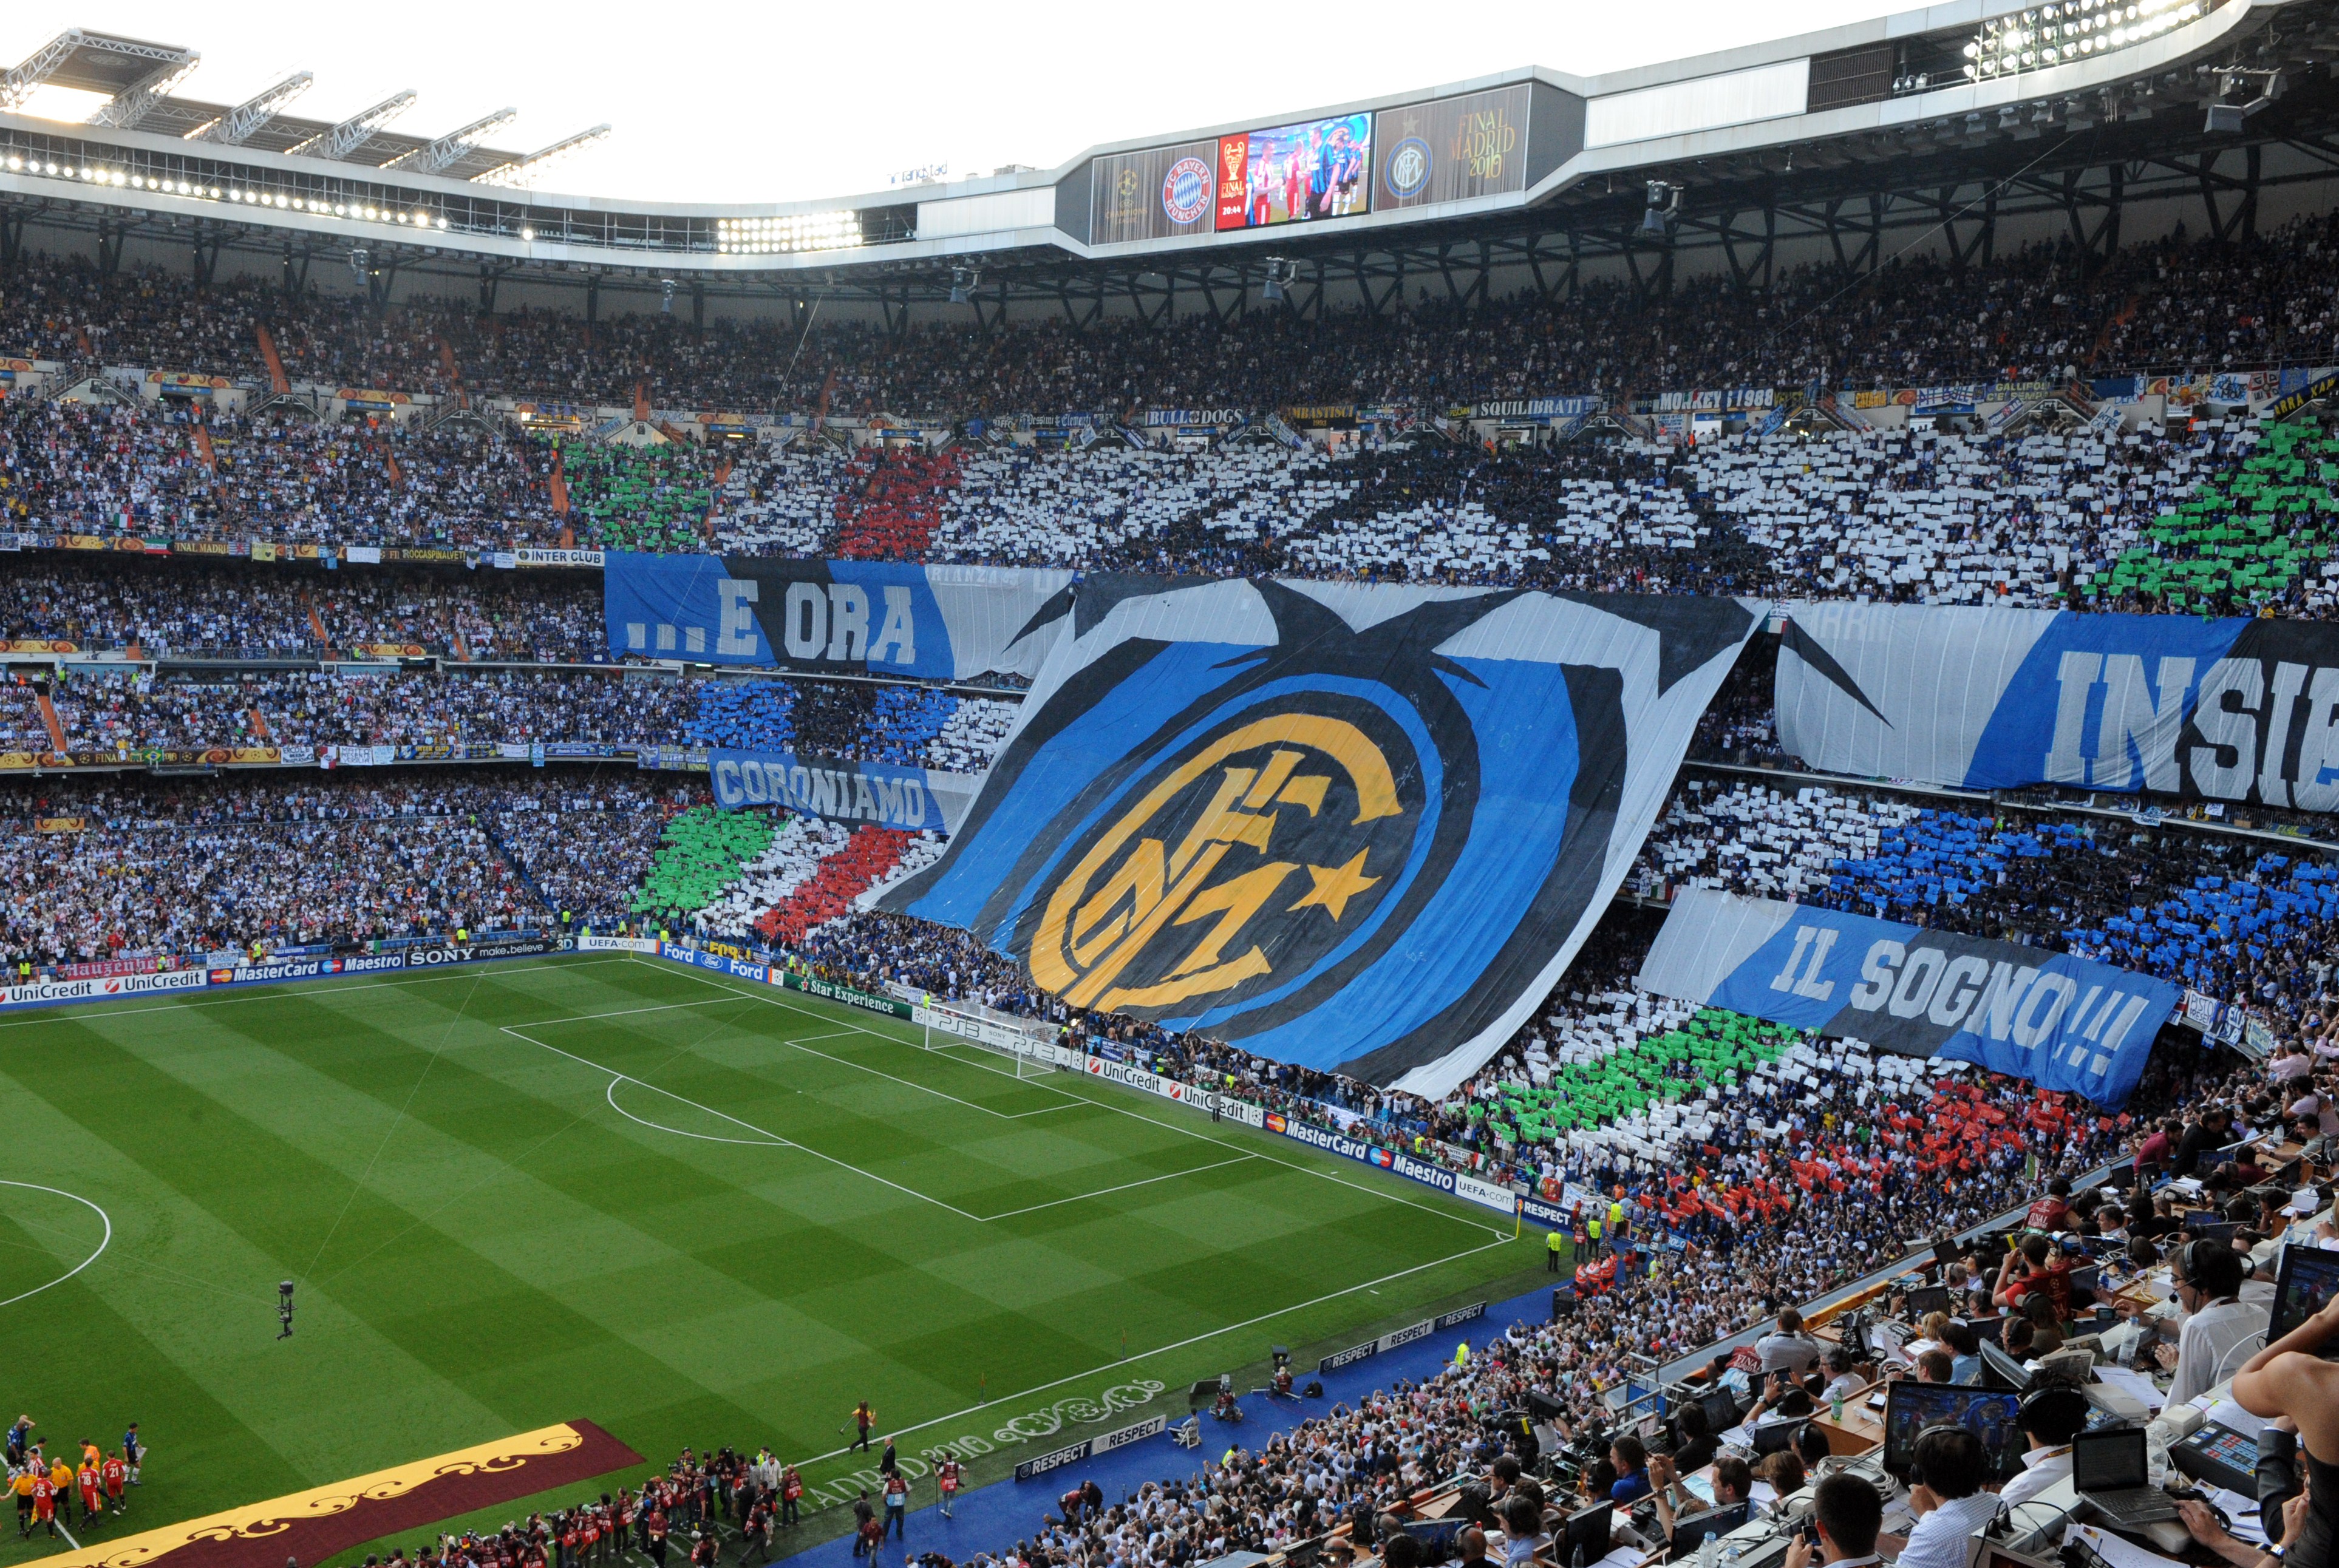 The logo of Inter Milan is displayed before the UEFA Champions League final soccer match between Inter Milan and Bayern Munich at the Santiago Bernab&eacute;u stadium in Madrid on May 22, 2010 (Mladen Antonov—AFP/Getty Images)